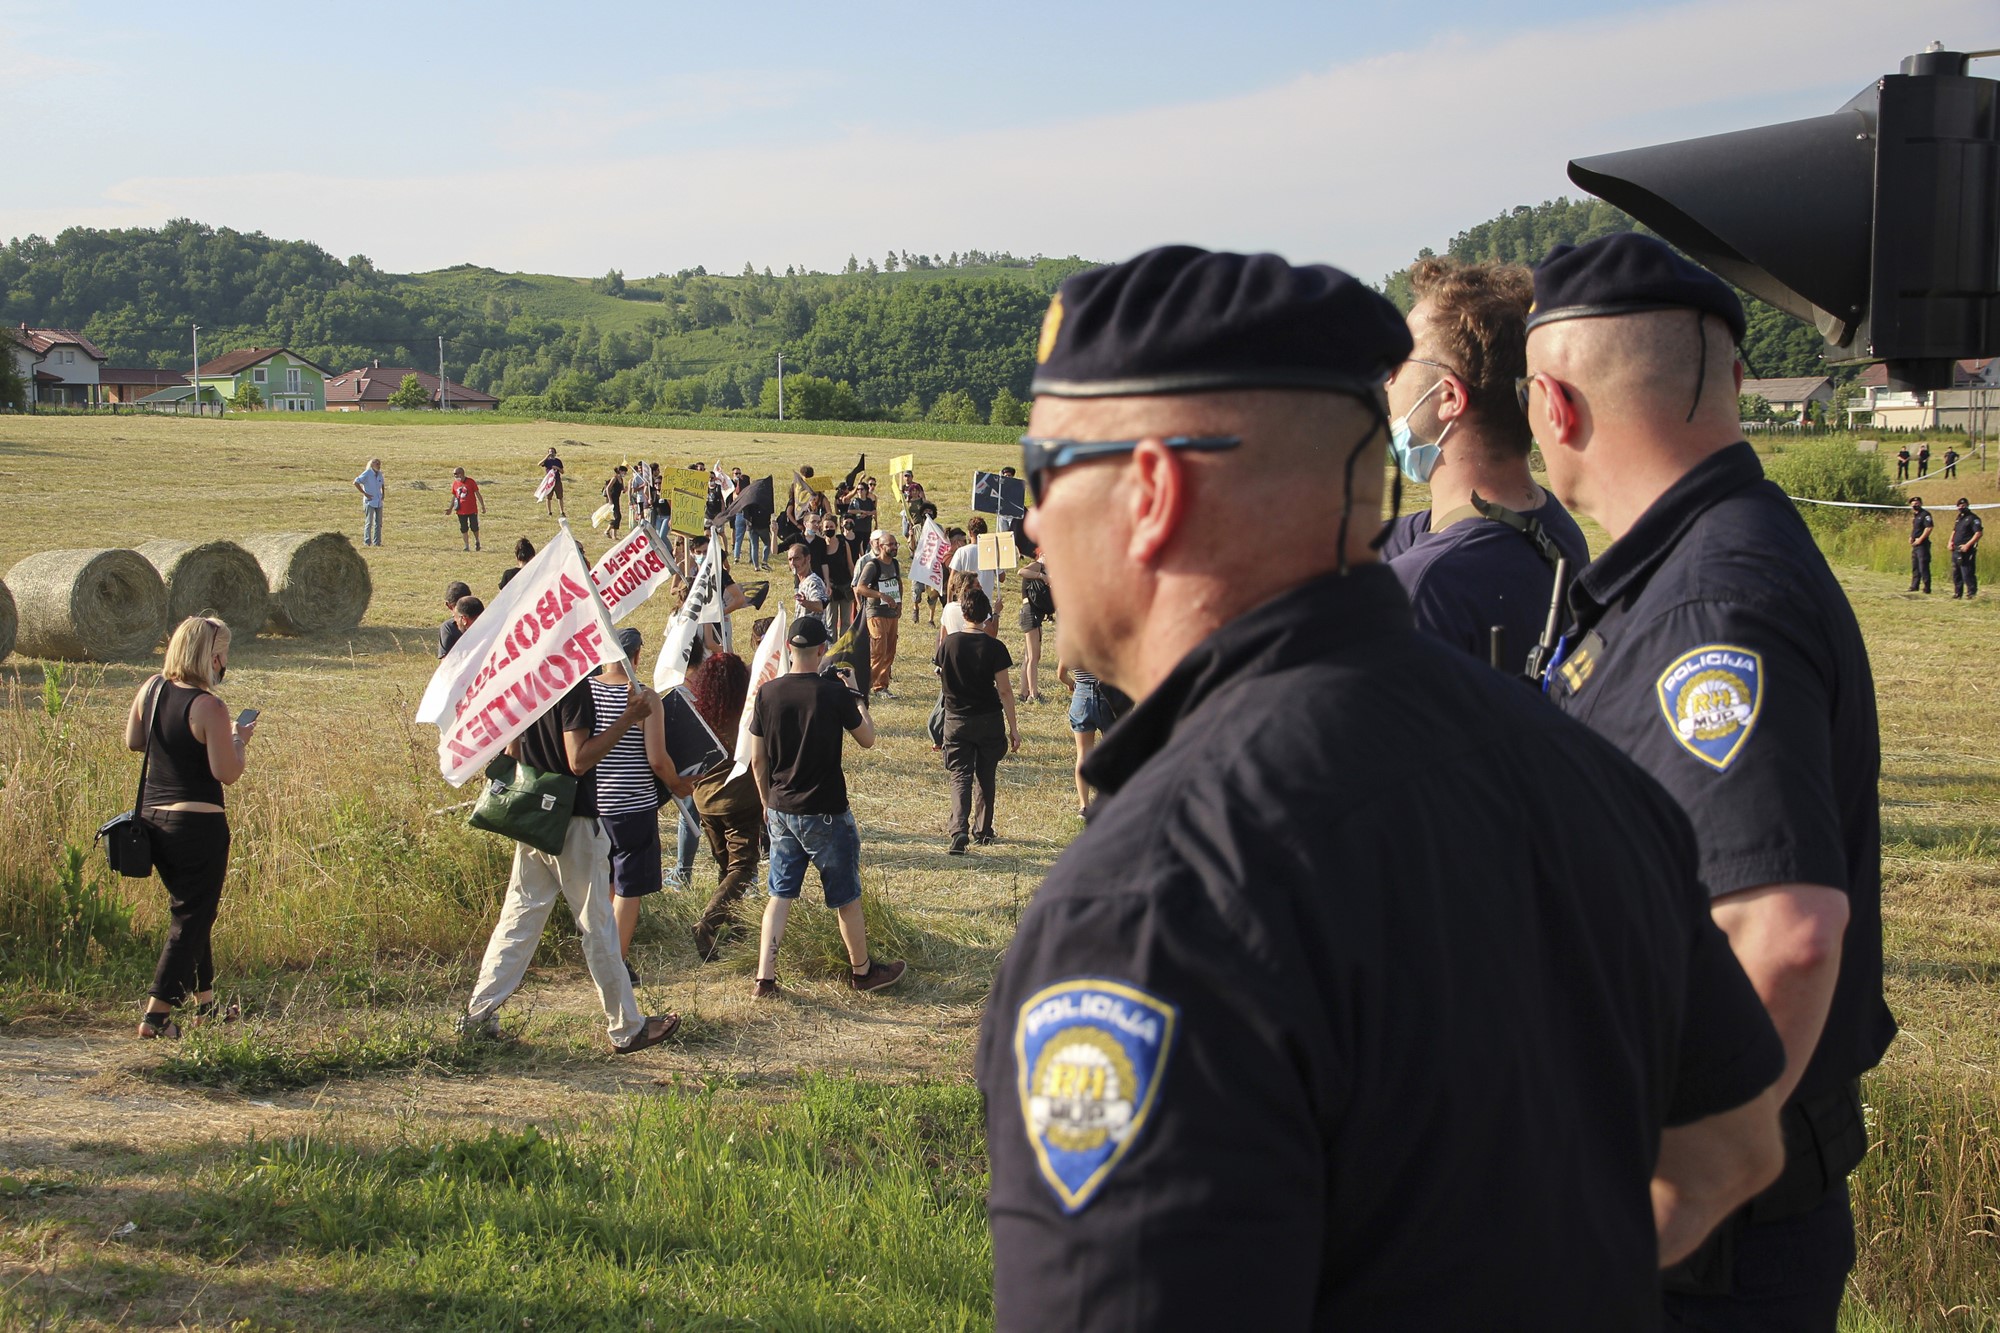 Police stand on a grassy hill watching people bearing flags walk past.